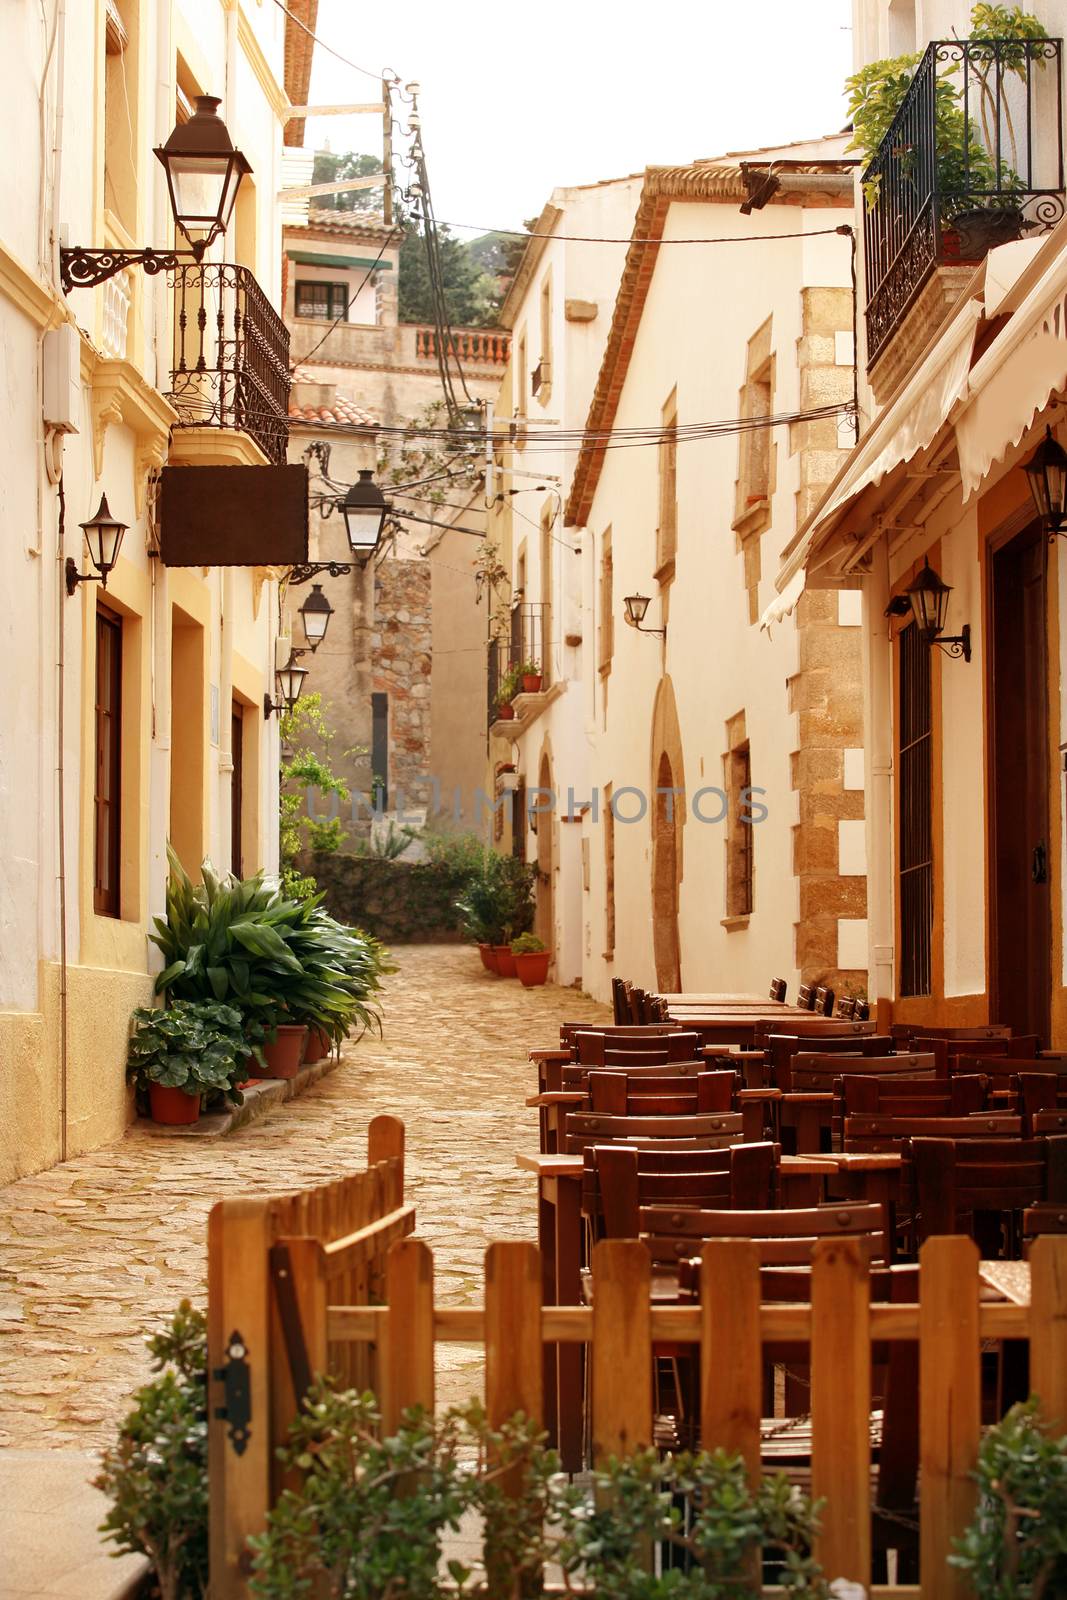 The narrow street in the old town of Alcudia, Mallorca